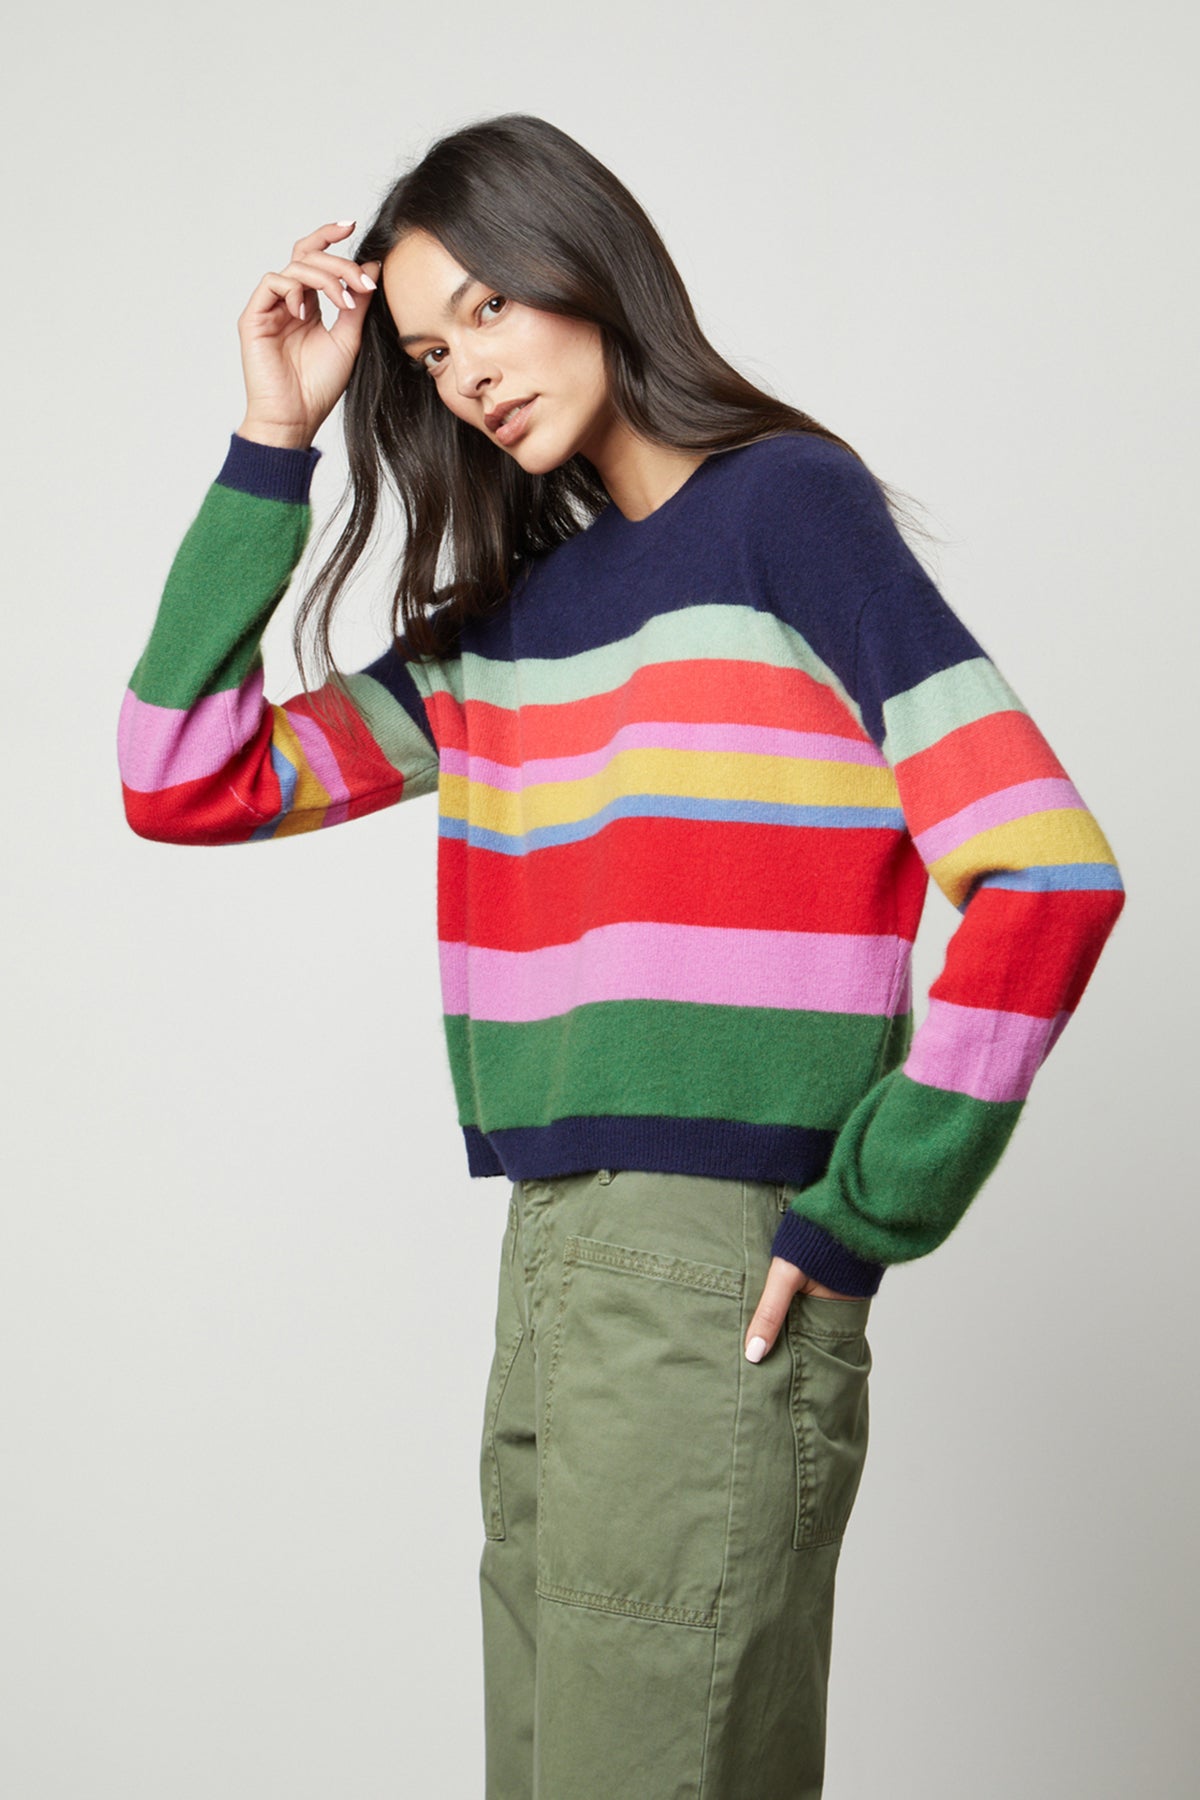 A model wearing a KACEY CASHMERE STRIPED CREW NECK sweater by Velvet by Graham & Spencer and green pants.-26897828610241